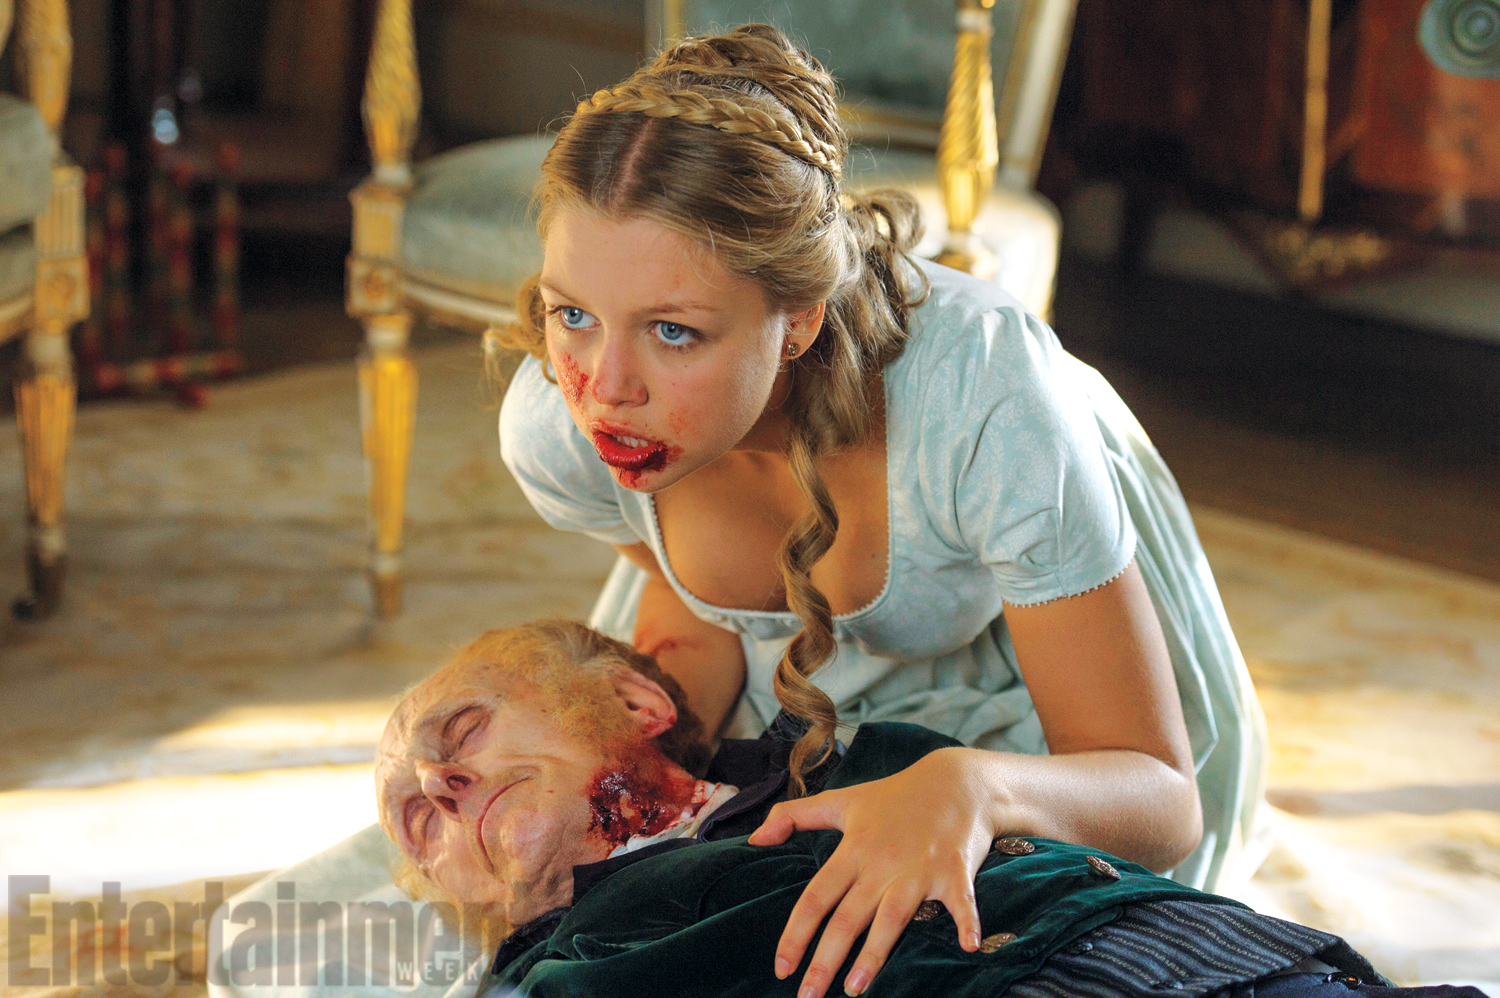 1017-1371-1372-ppz-pride-and-prejudice-and-zombies-03a.jpg